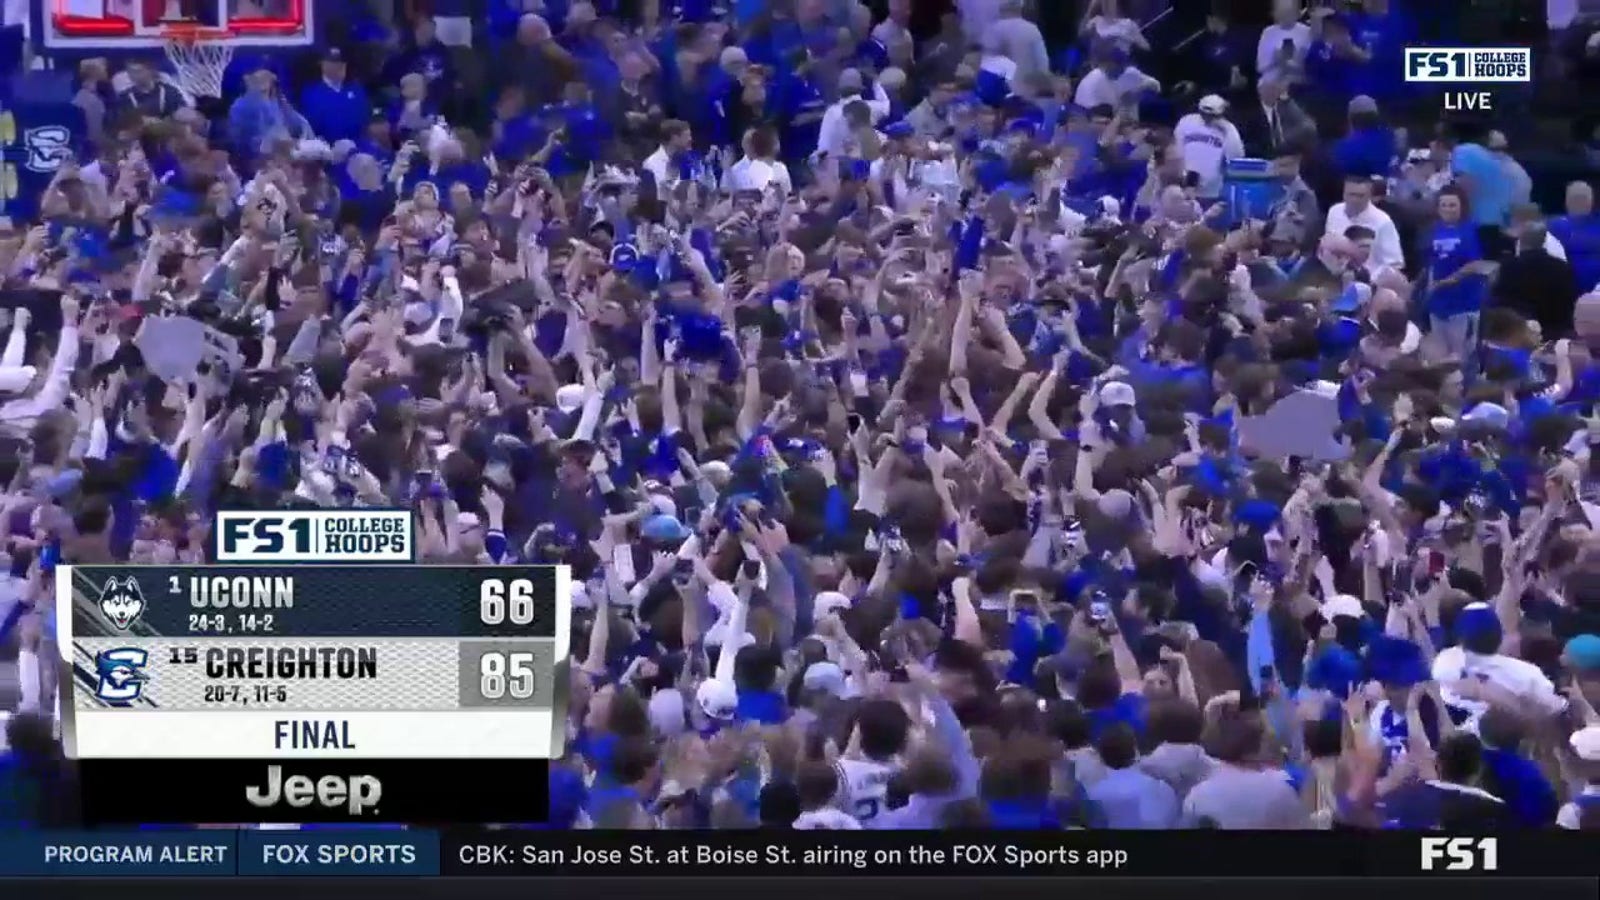 Beryl TV bpqfq172xkkcxnu5 No. 15 Creighton knocks off UConn 85-66 for program's first win over a No. 1-ranked team Sports 